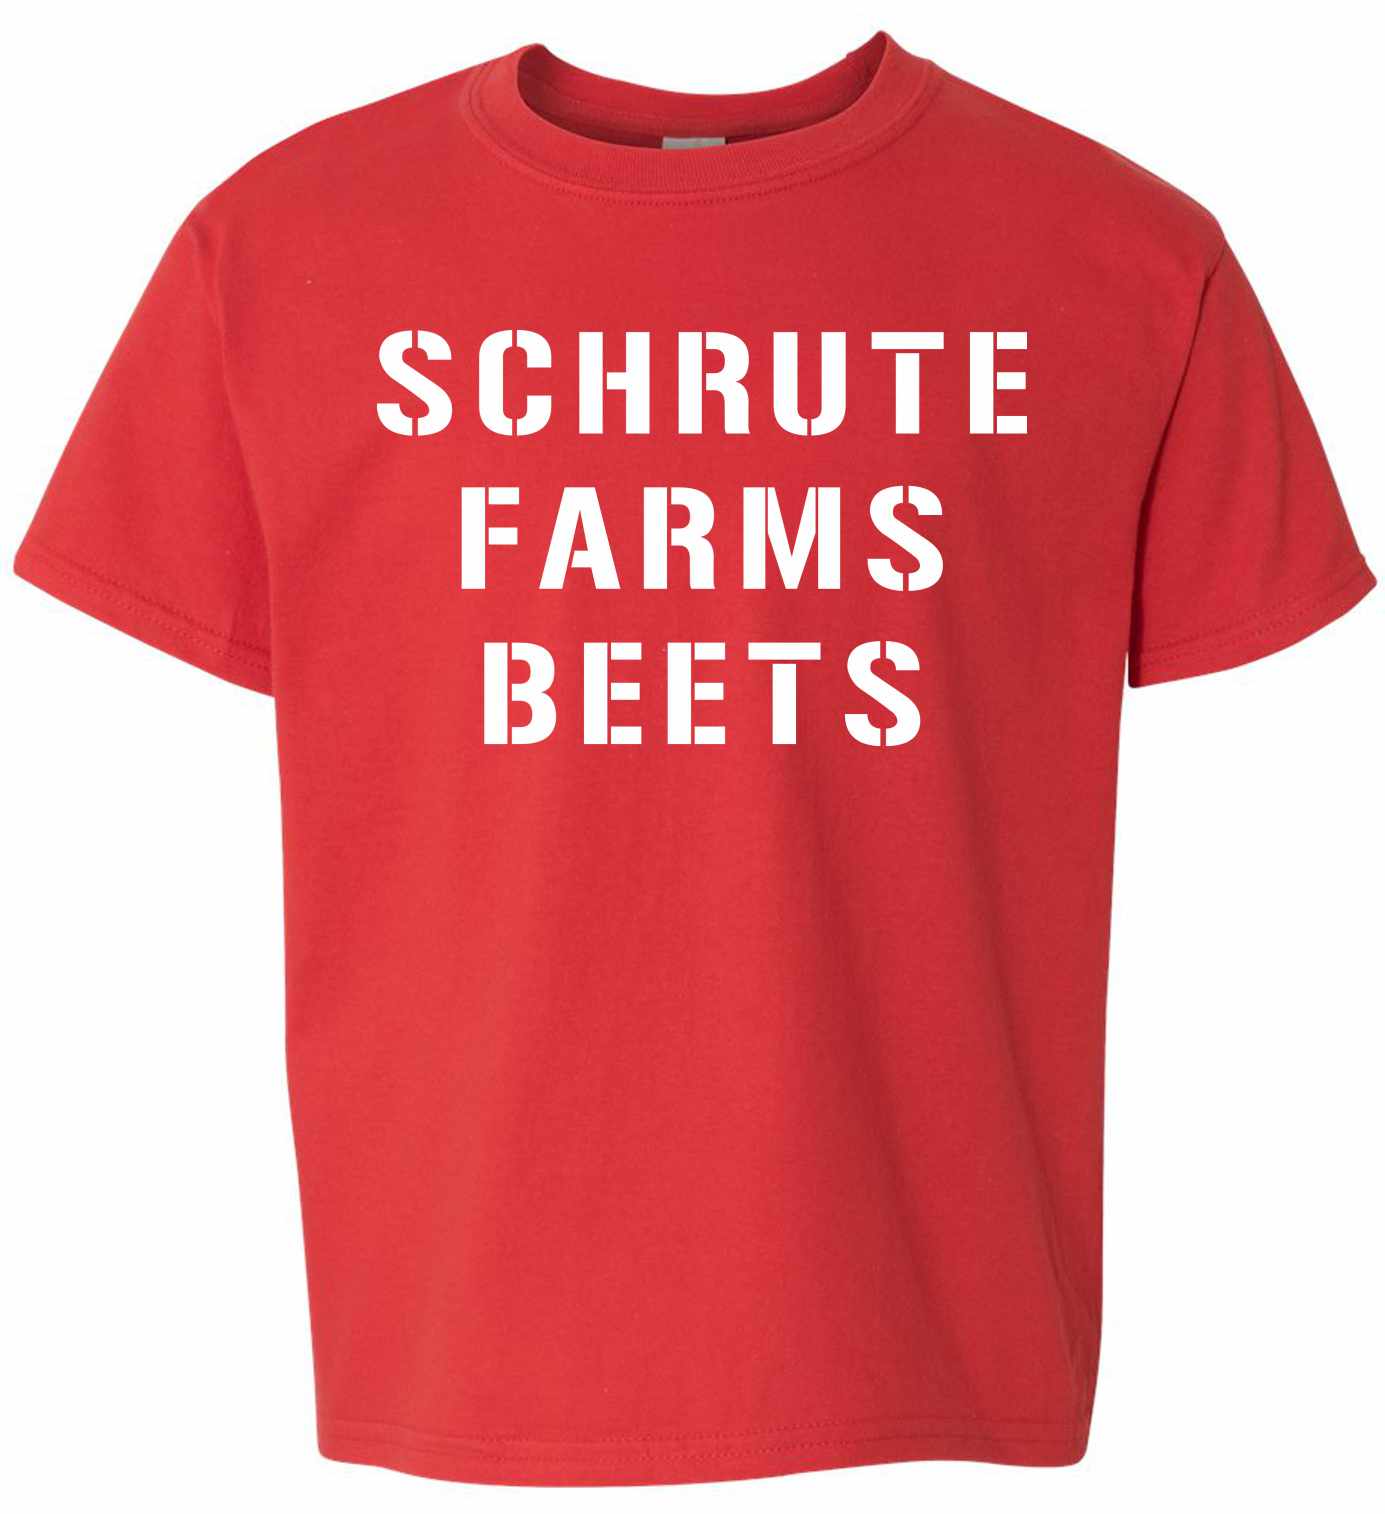 SCHRUTE FARMS BEETS on Youth T-Shirt